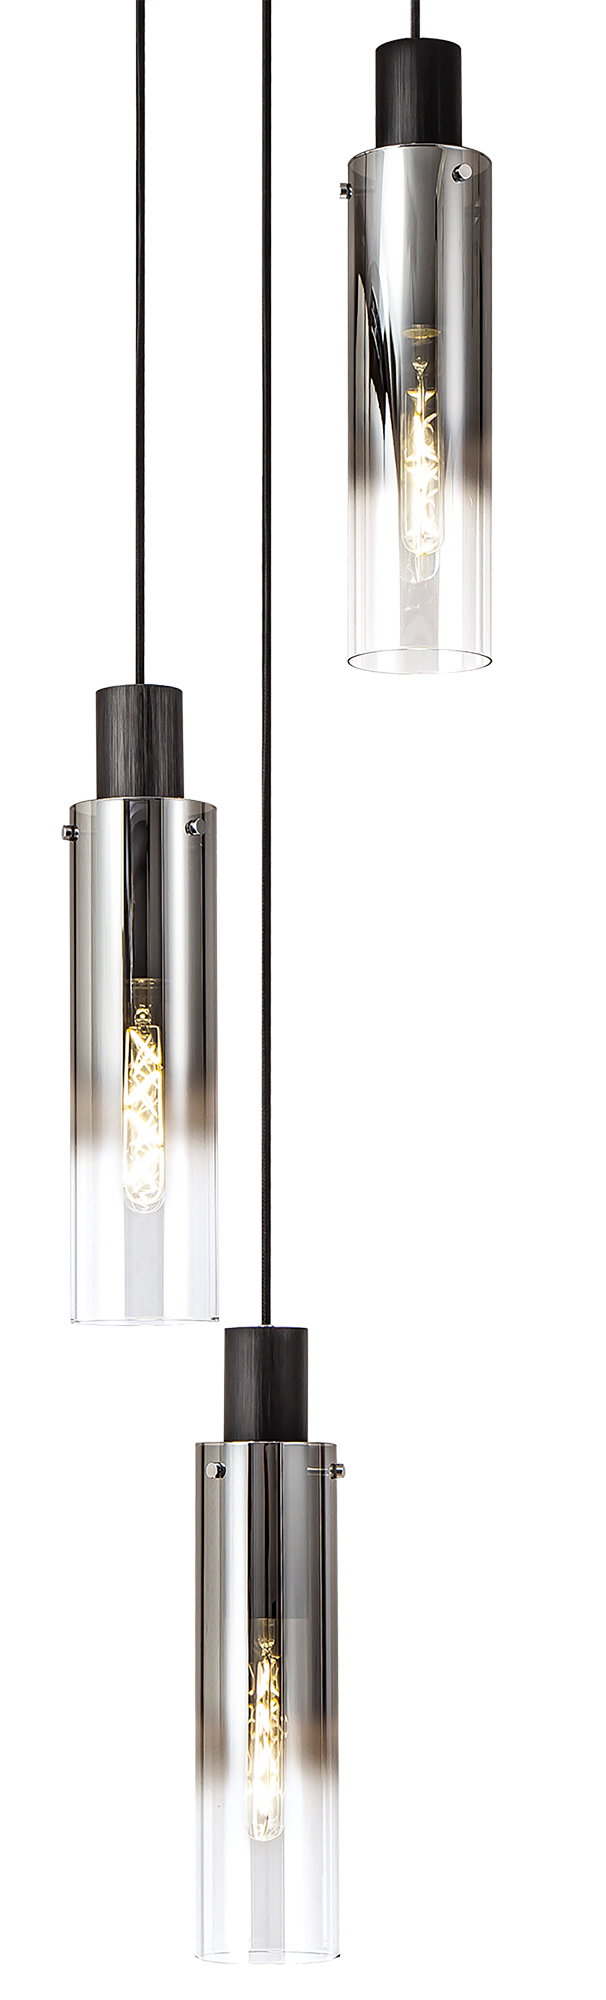 Idolite Snowdon Slim Black/Polished Chrome 3 Light Pendant With Smoked/Clear Ombre Glasses